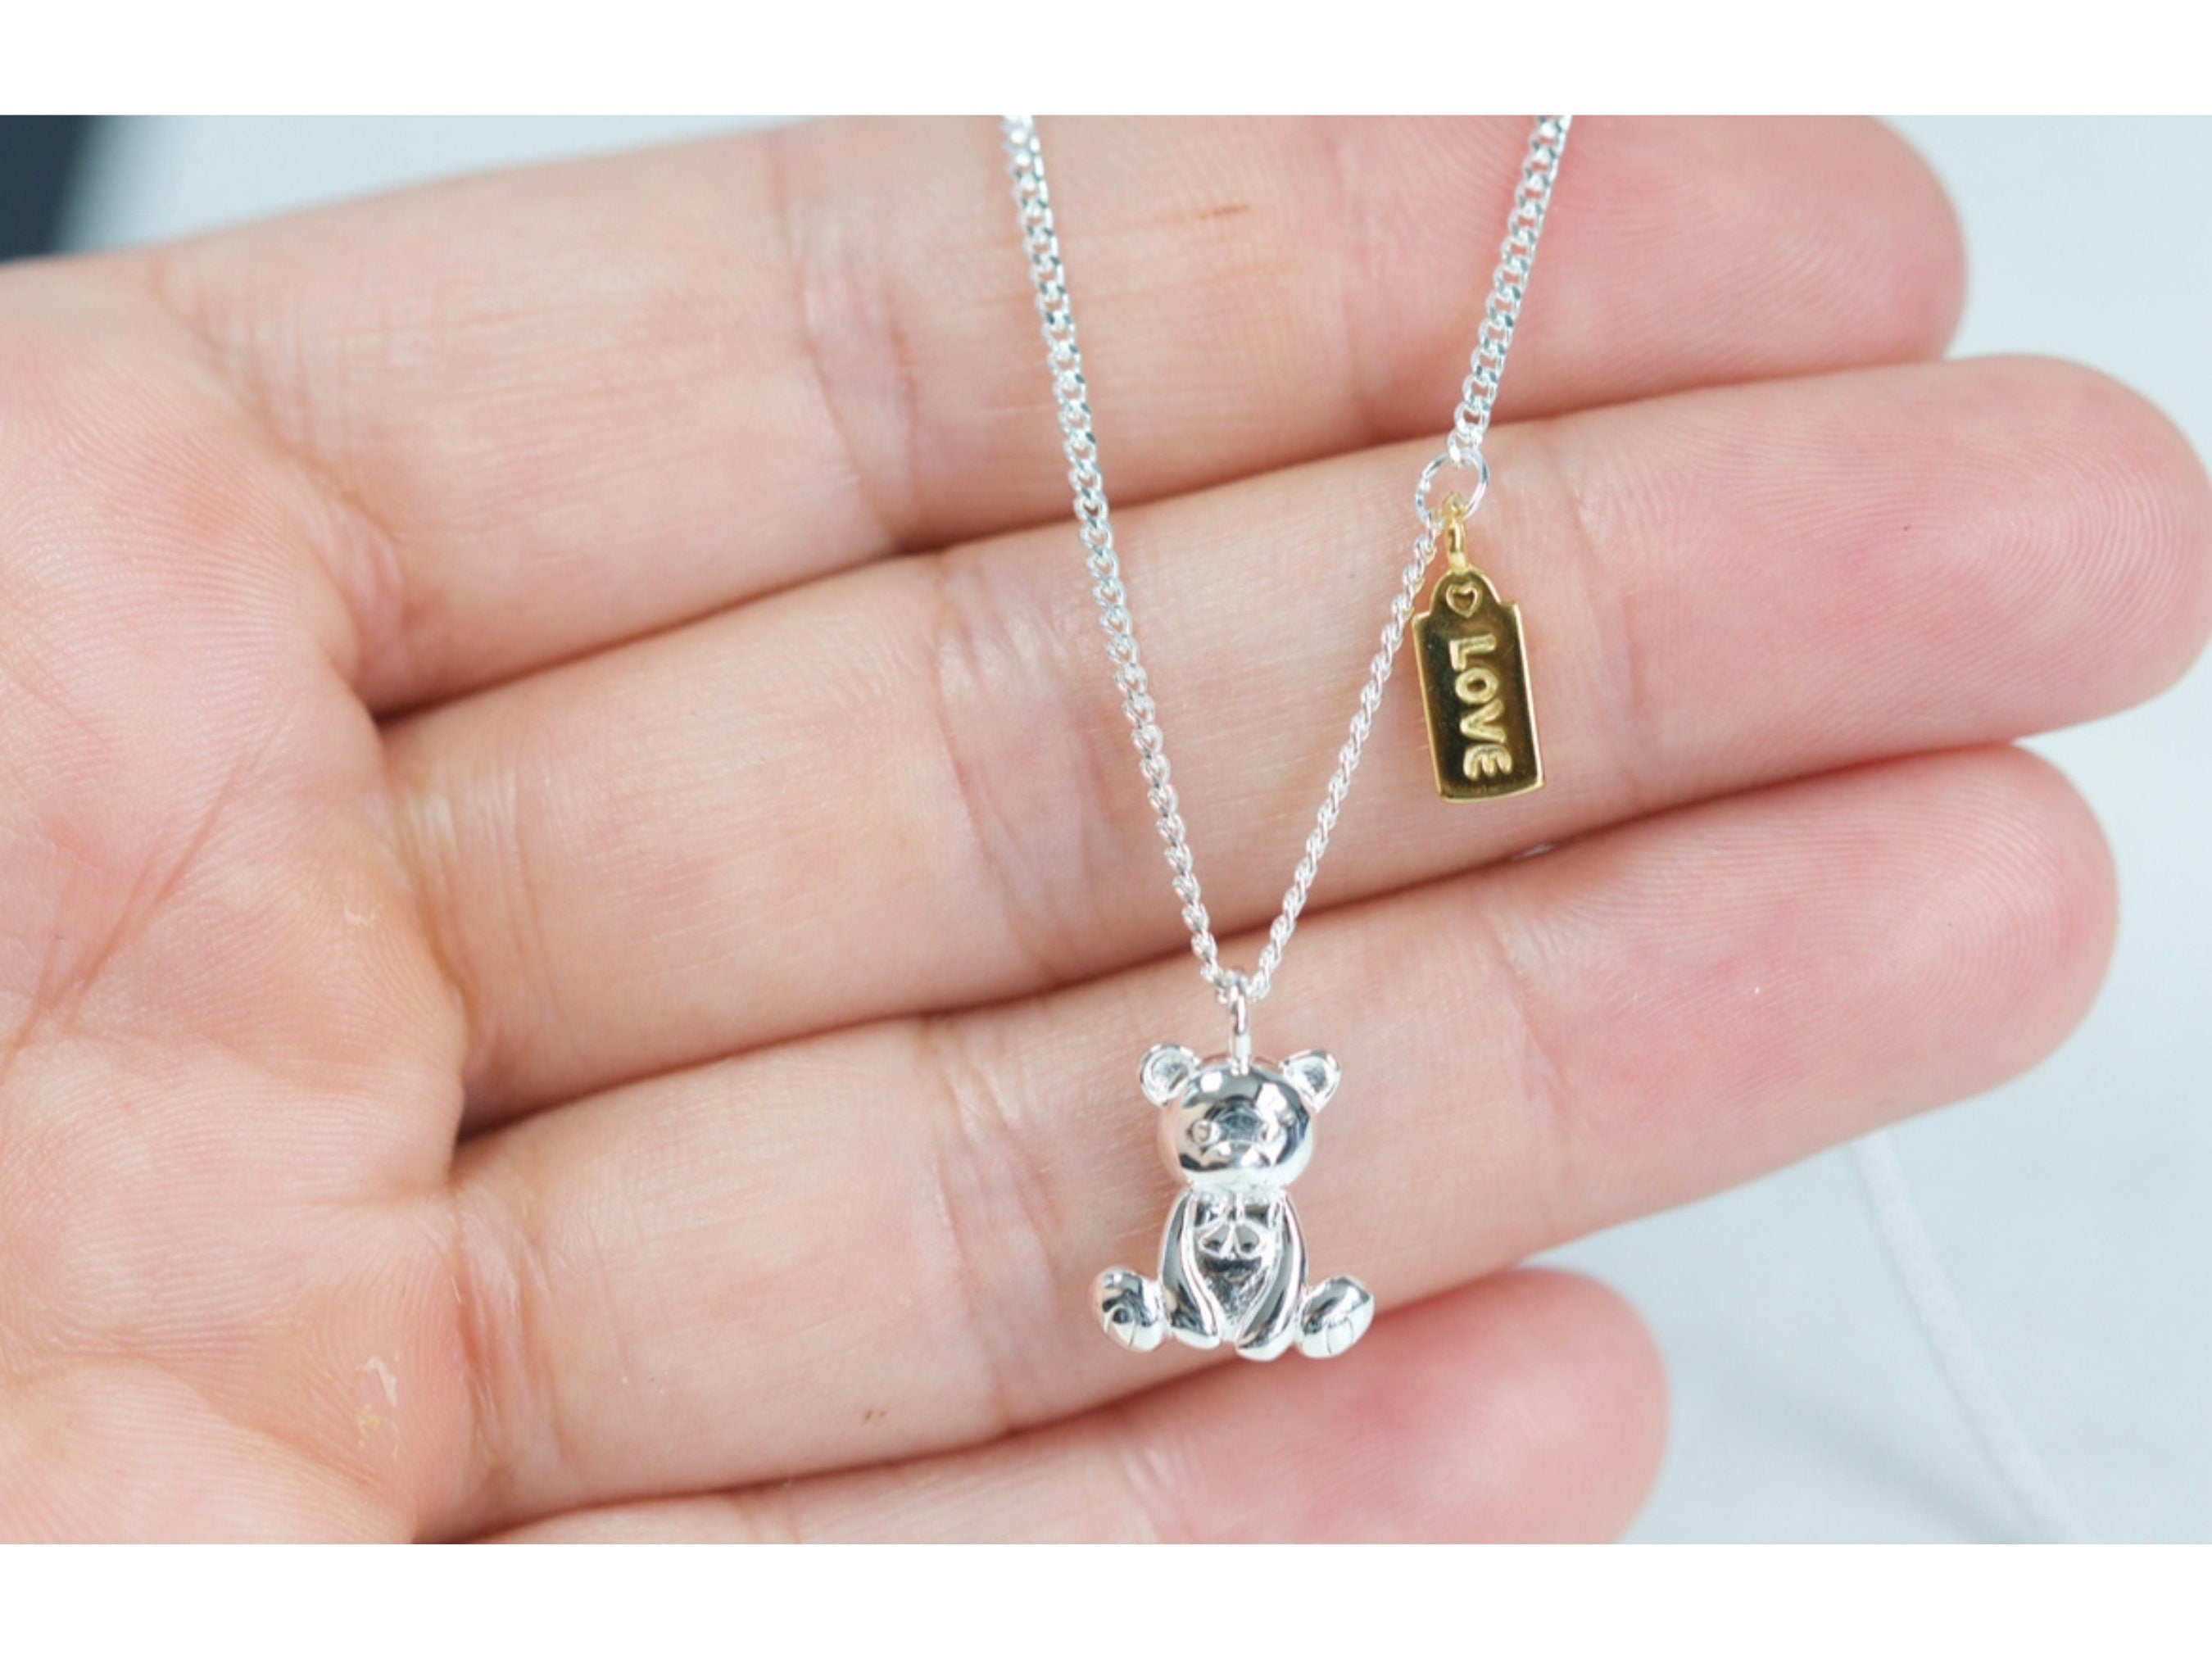 Gummy Bear Single Charm Necklace - American Made Pewter Necklaces from  Chubby Chico Charms